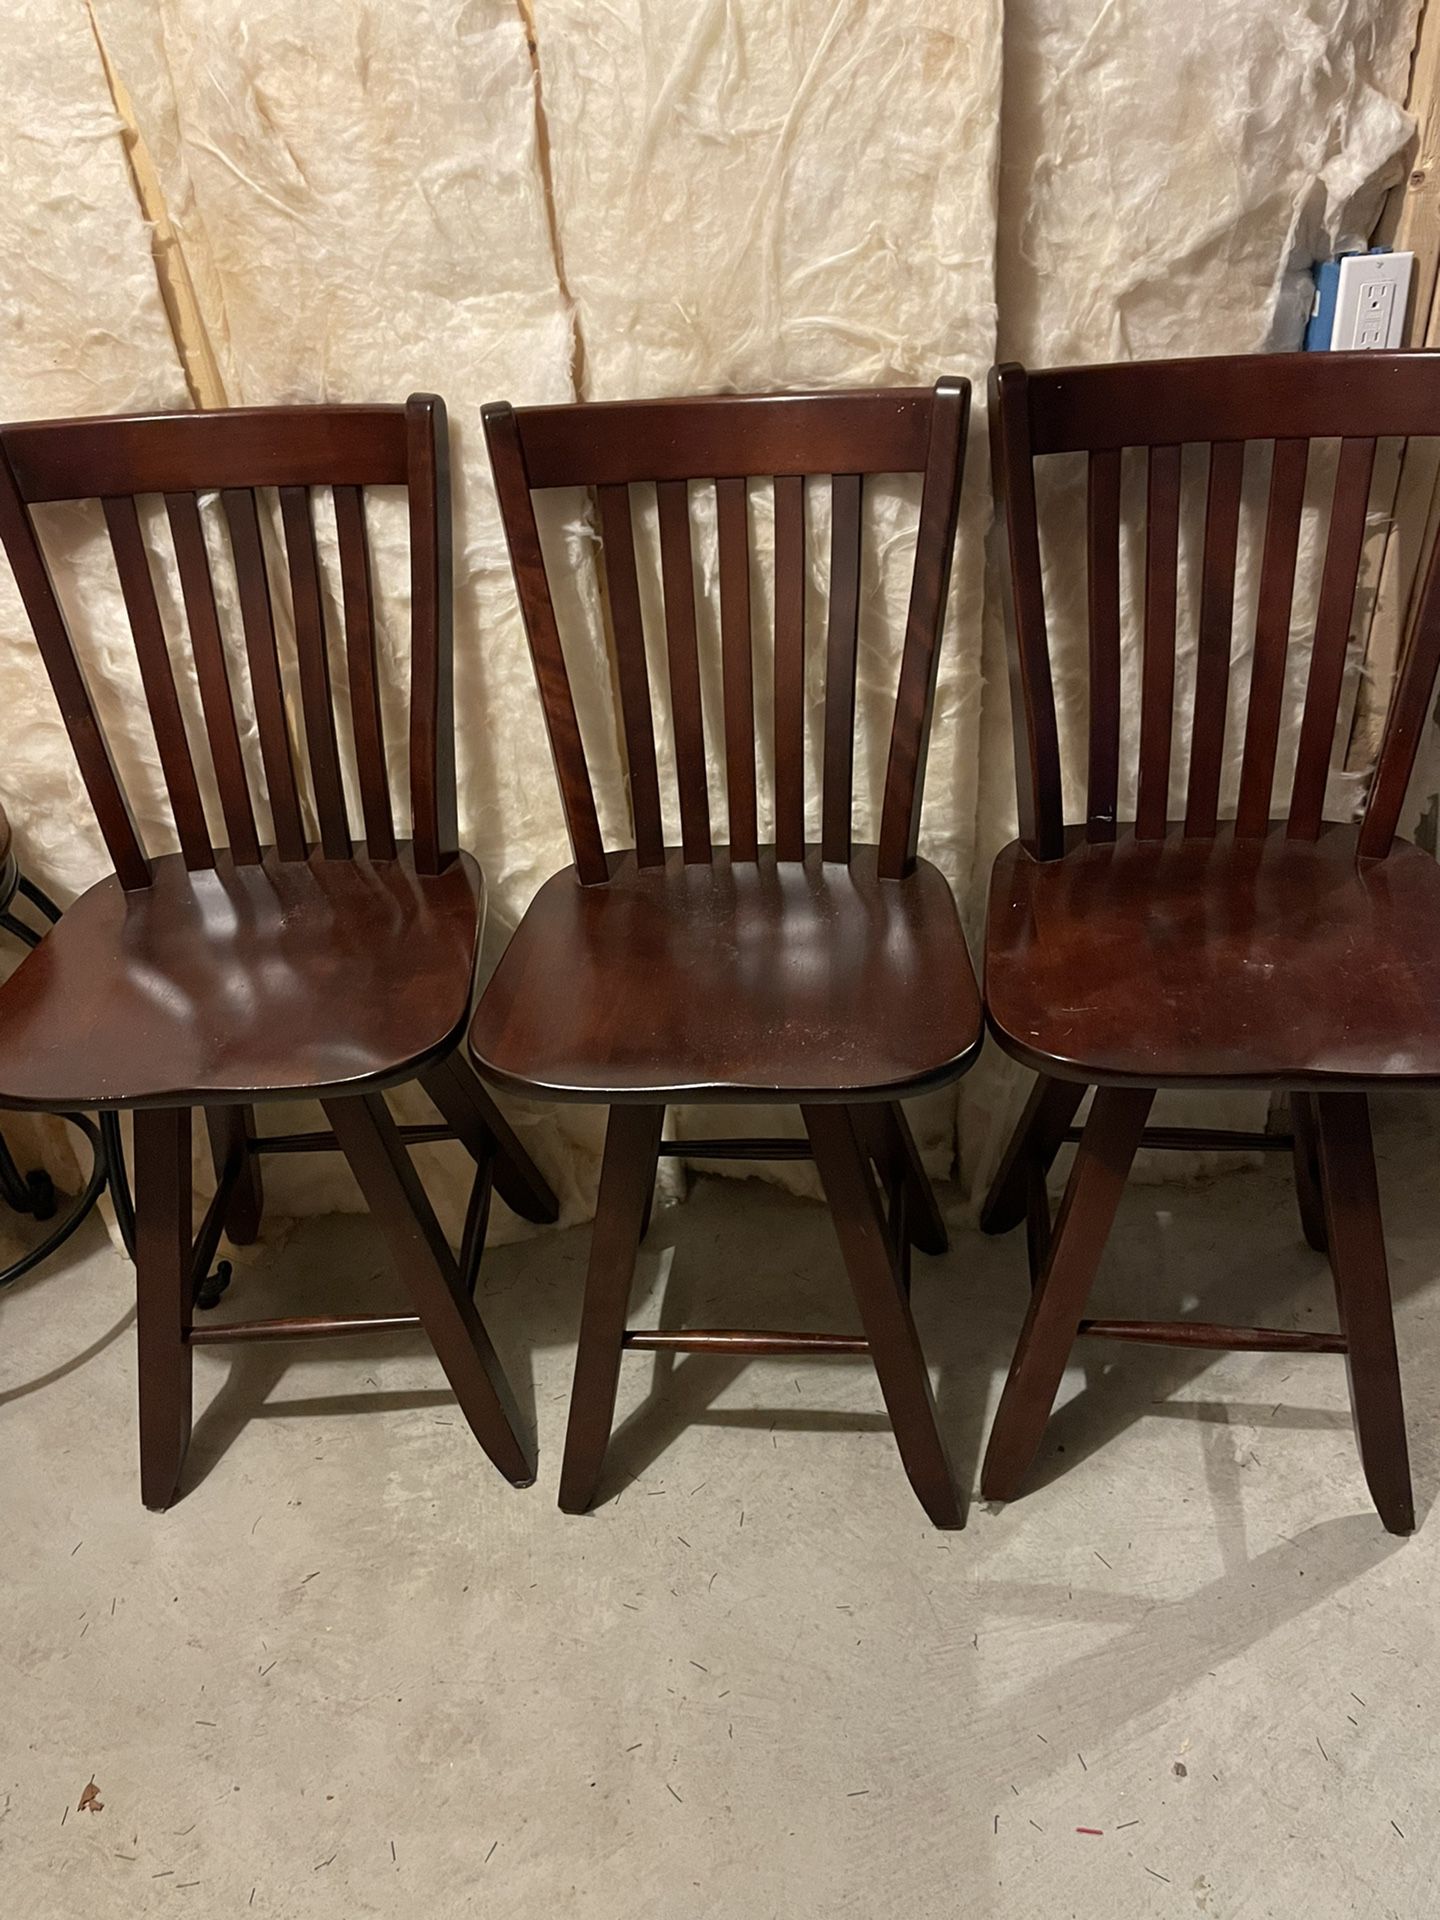 3 Brown Wooden Counter Stools